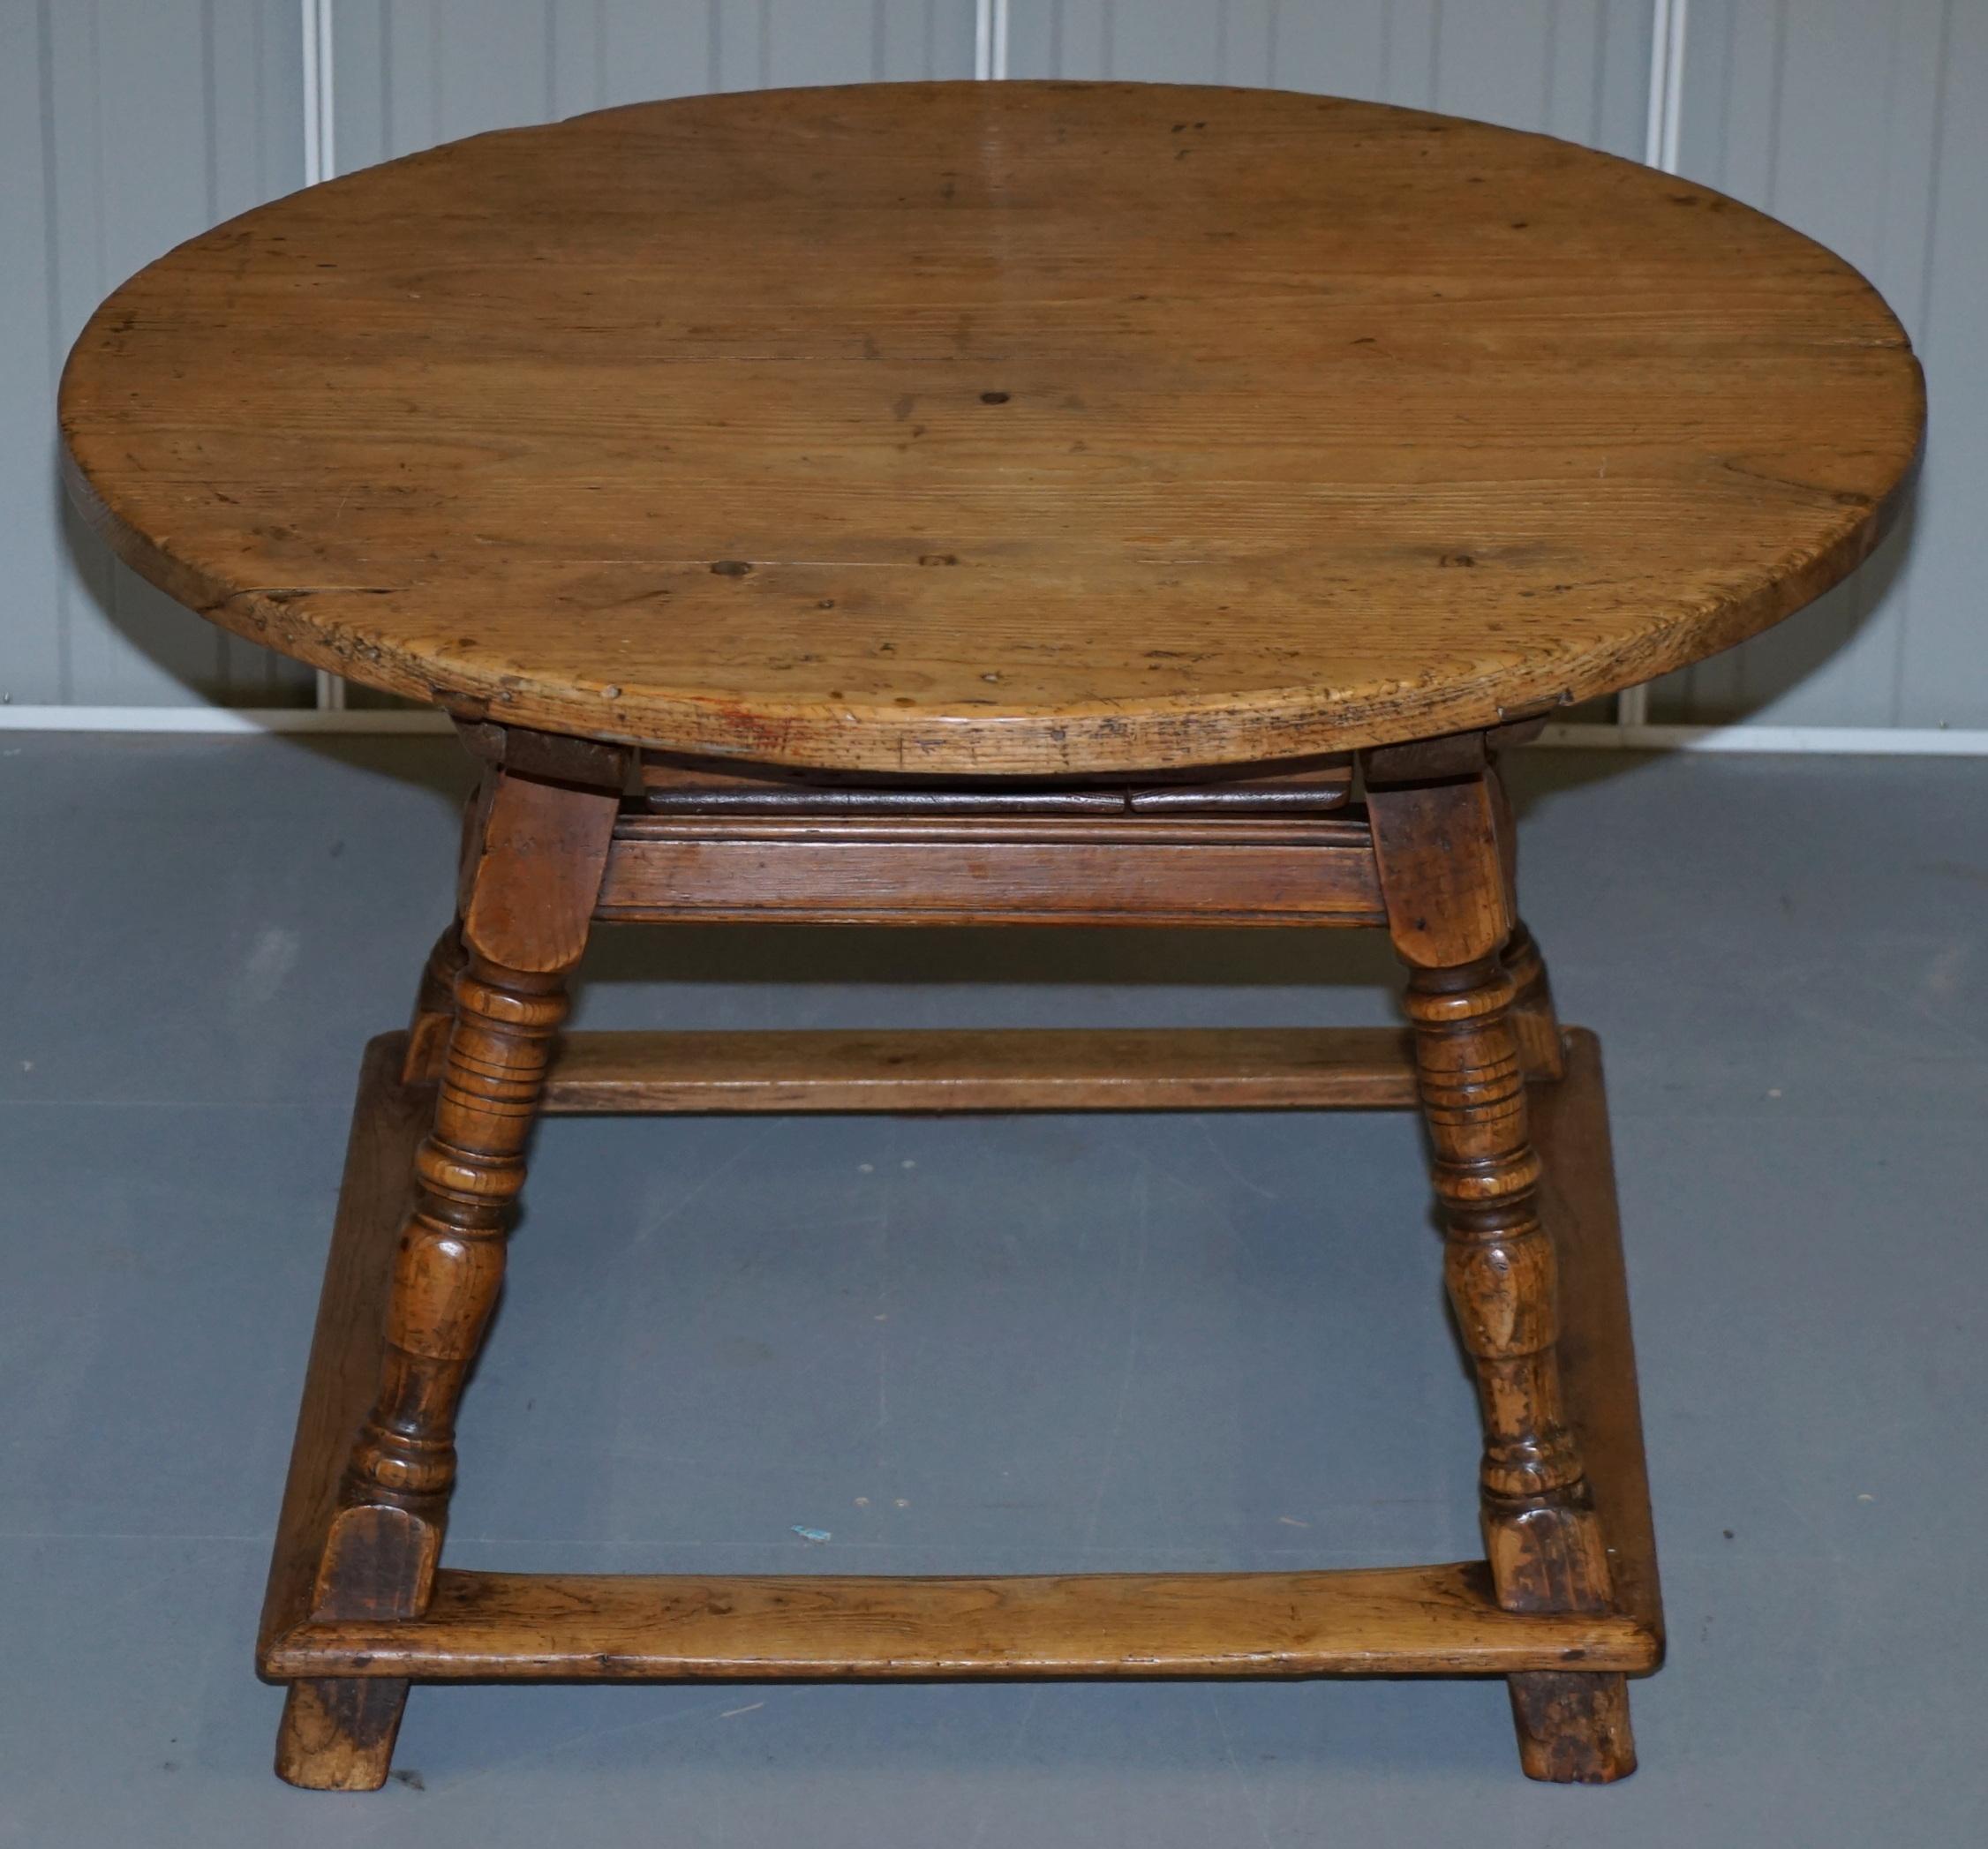 We are delighted to offer for sale this lovely original circa 1780 solid pine farmhouse country round dining table

A very good-looking piece, it has traces of original paint around the base and legs, its very nice size that seats four people